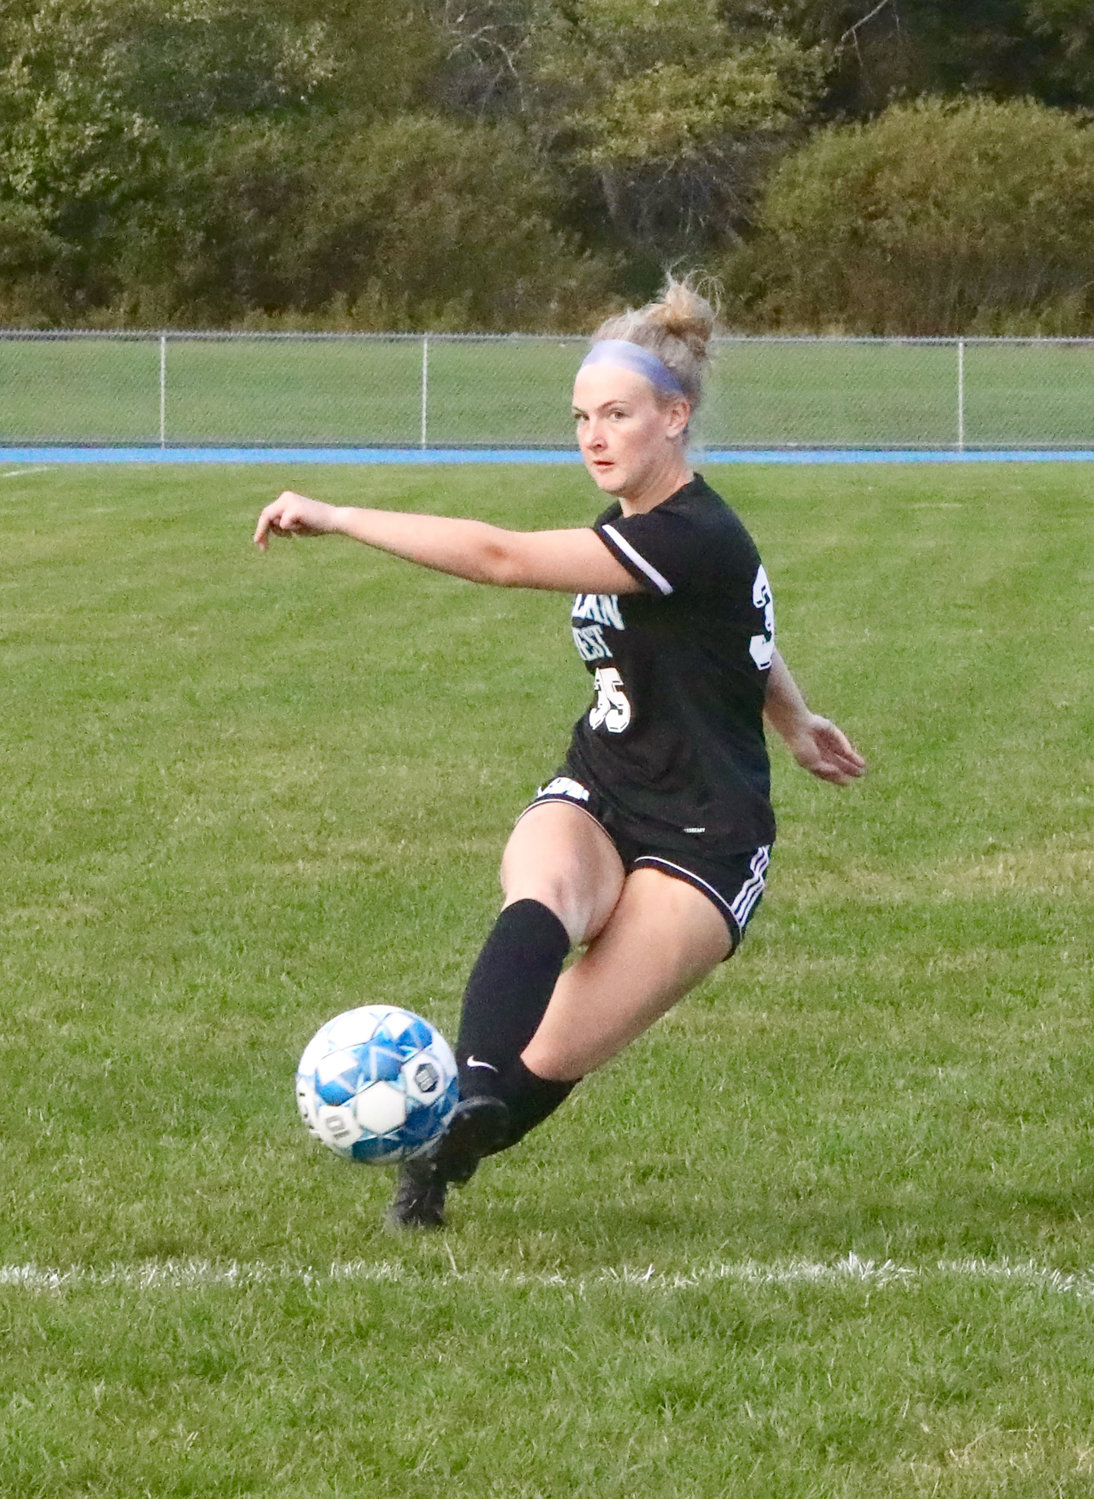 Sullivan West senior Lucia Kennedy fires a shot on goal. She scored one of the eight goals on the day.